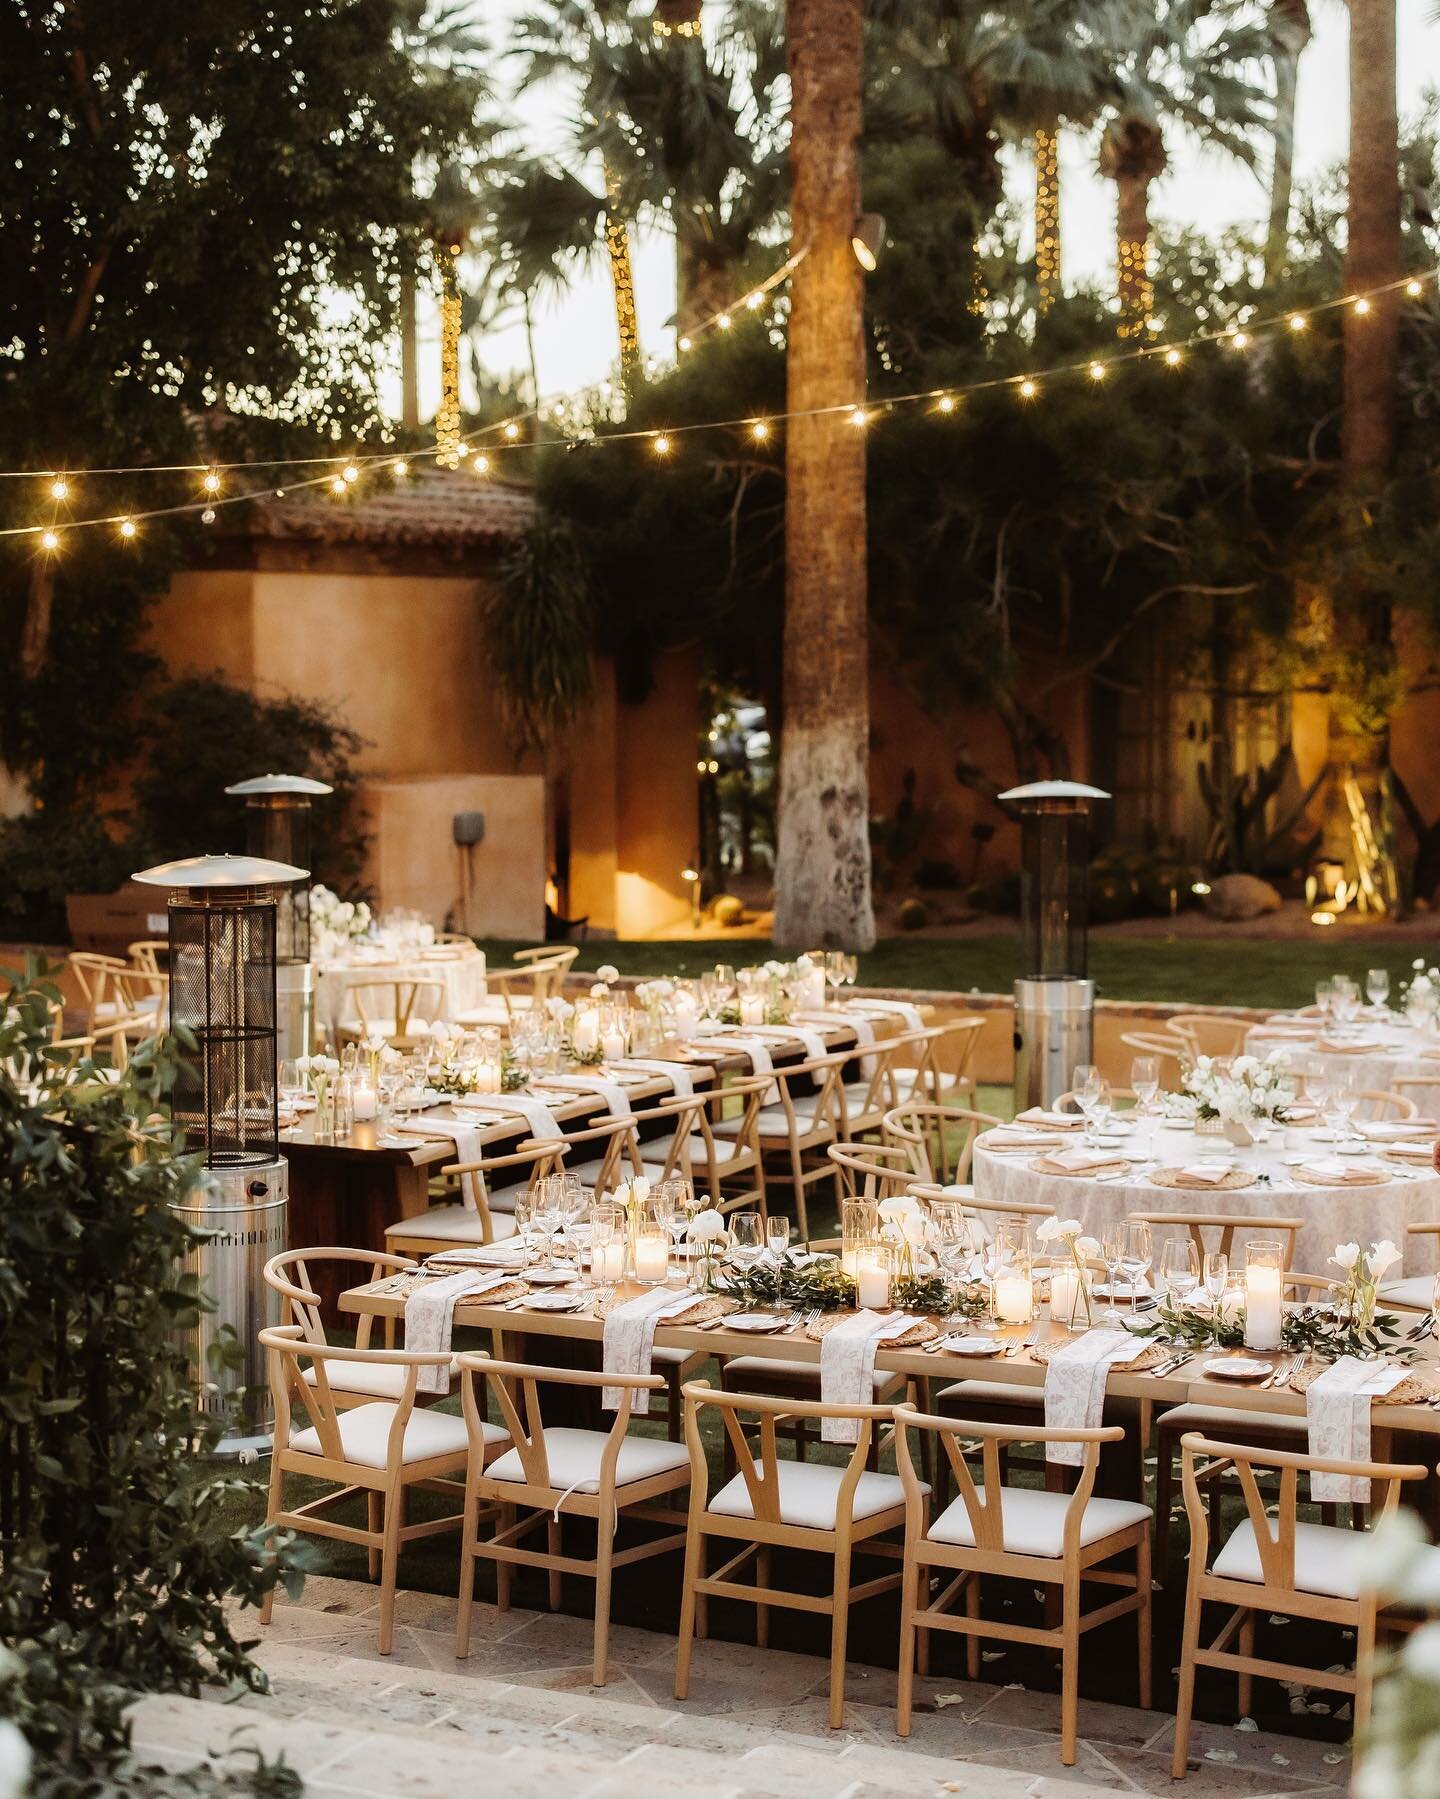 Royal Palms was the perfect canvas for this @hudsongreyweddings masterpiece!

Live Edge Tables
Linen Wishbone Chairs
Cafe Cane Chairs
Heaters